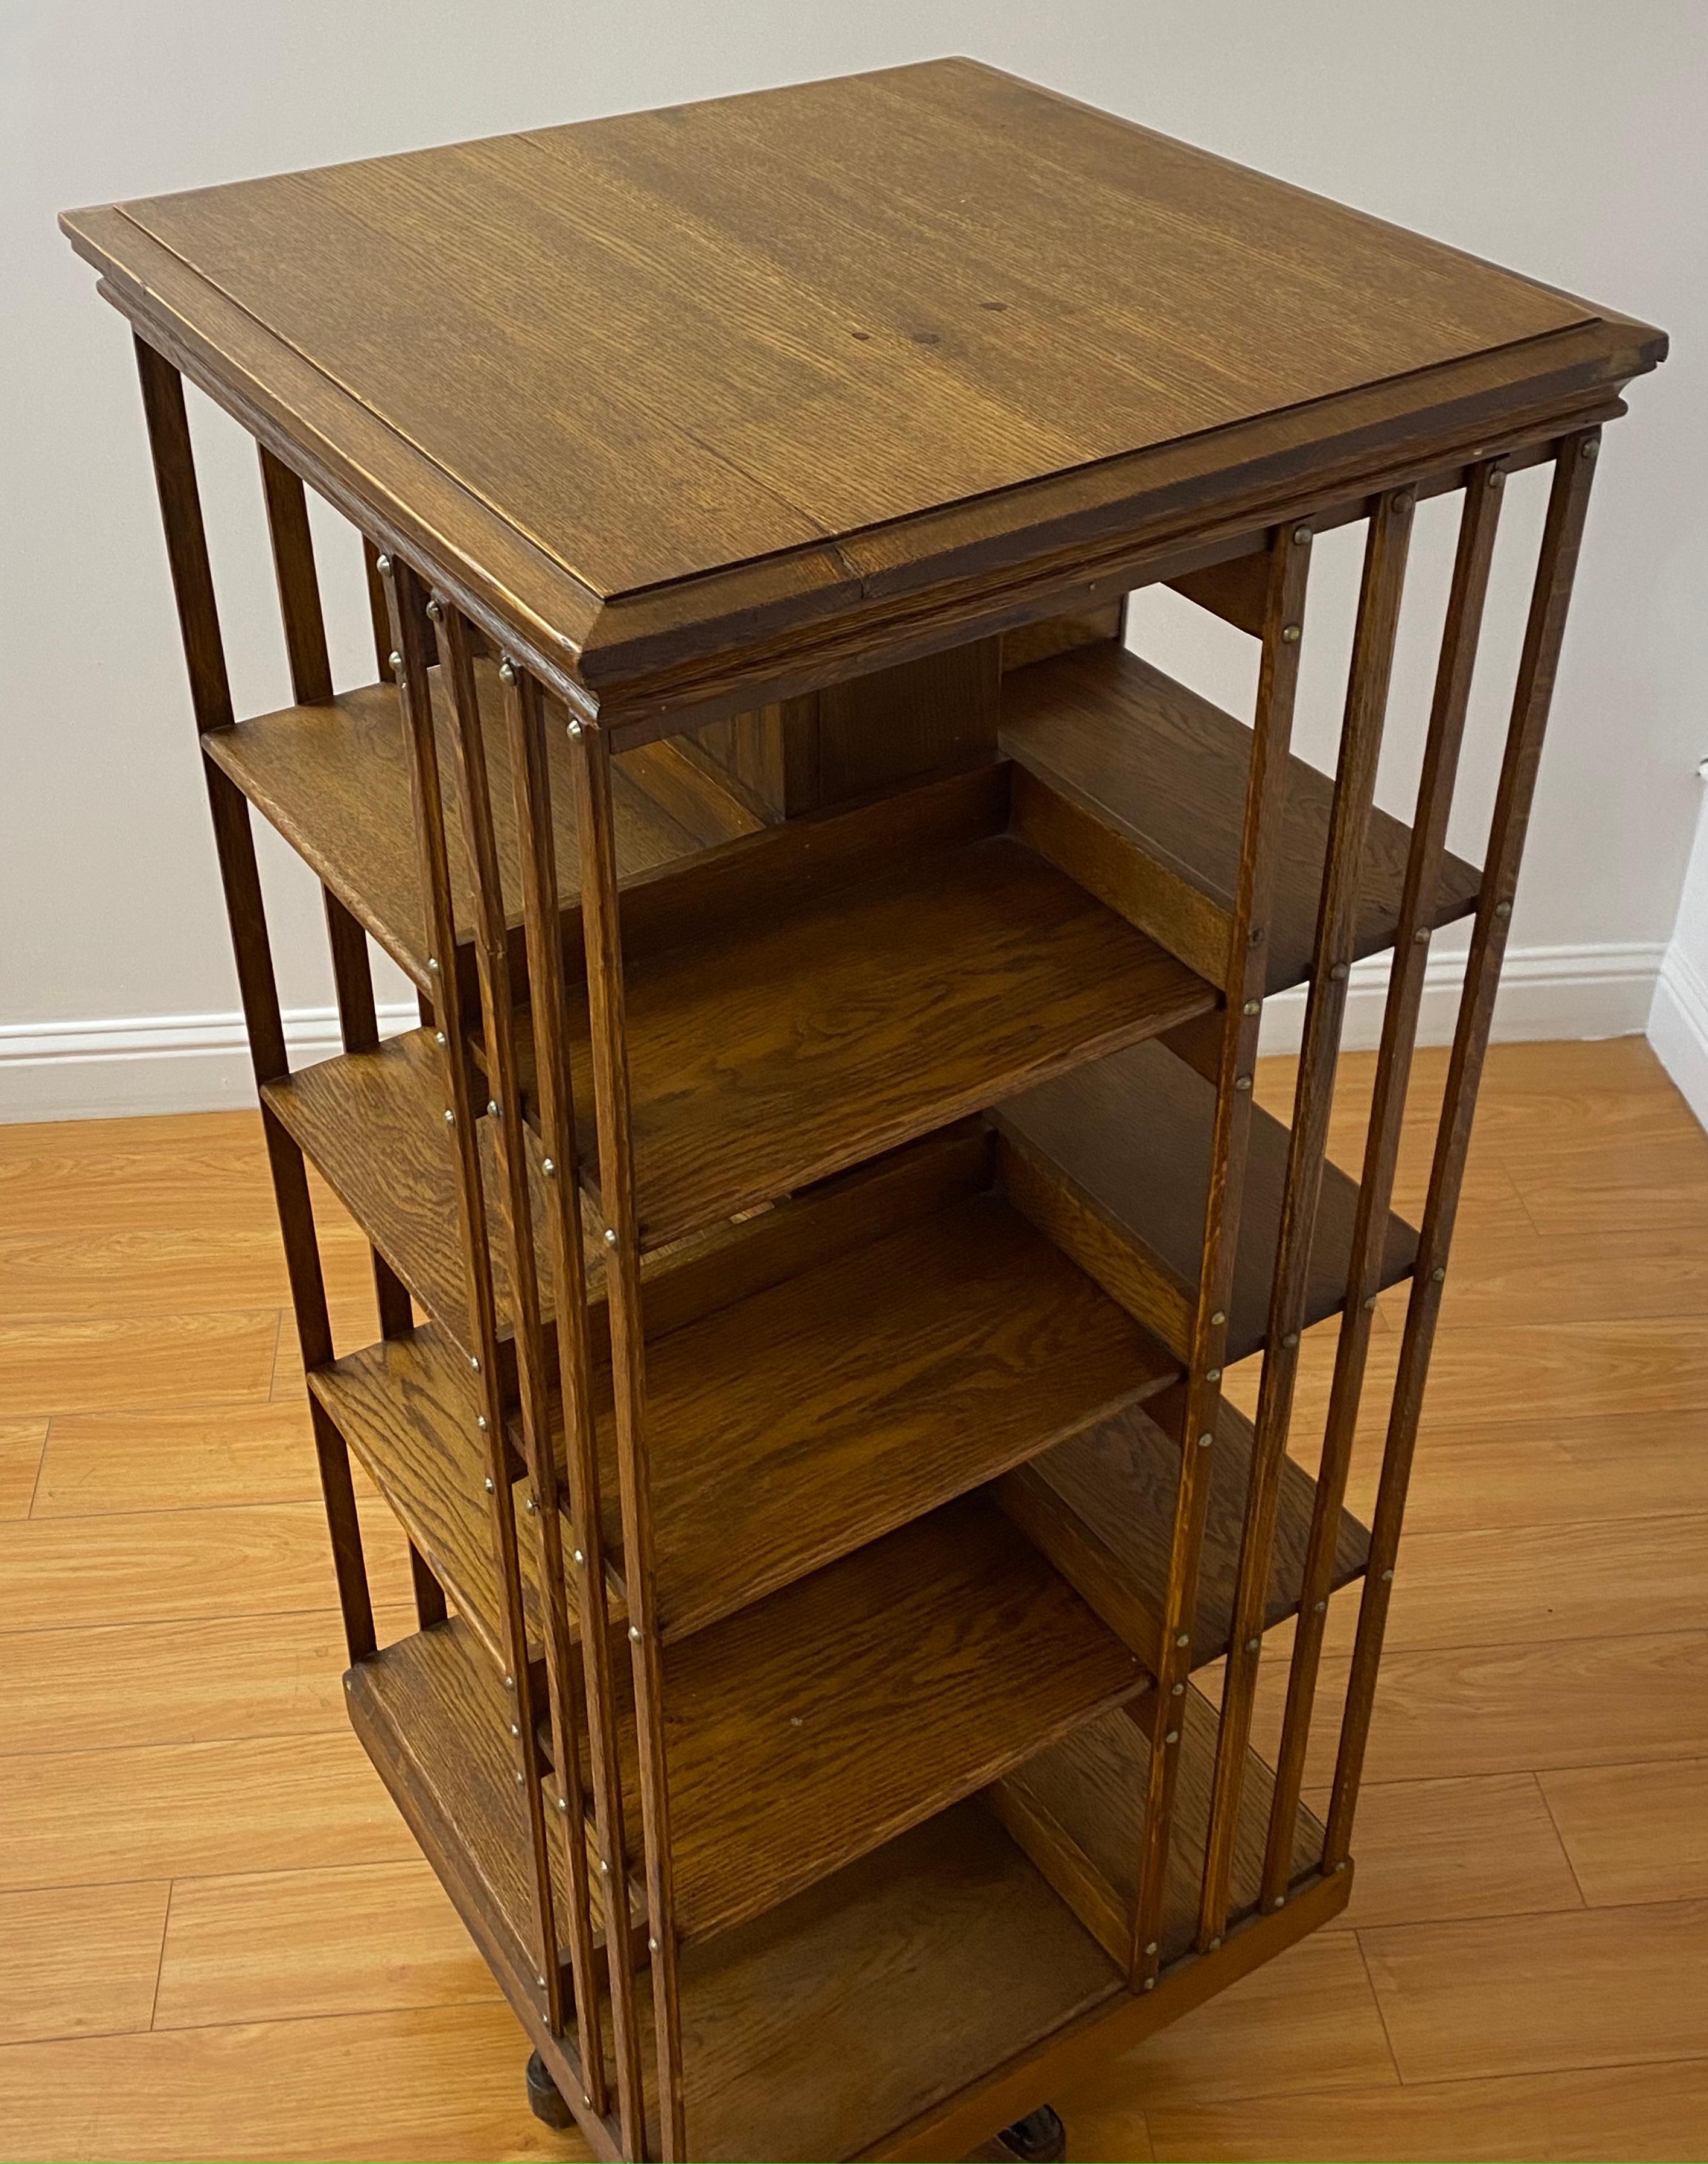 Hand-Crafted Early 20th Century Arts & Crafts Rotating Bookcase, C.1900-1910